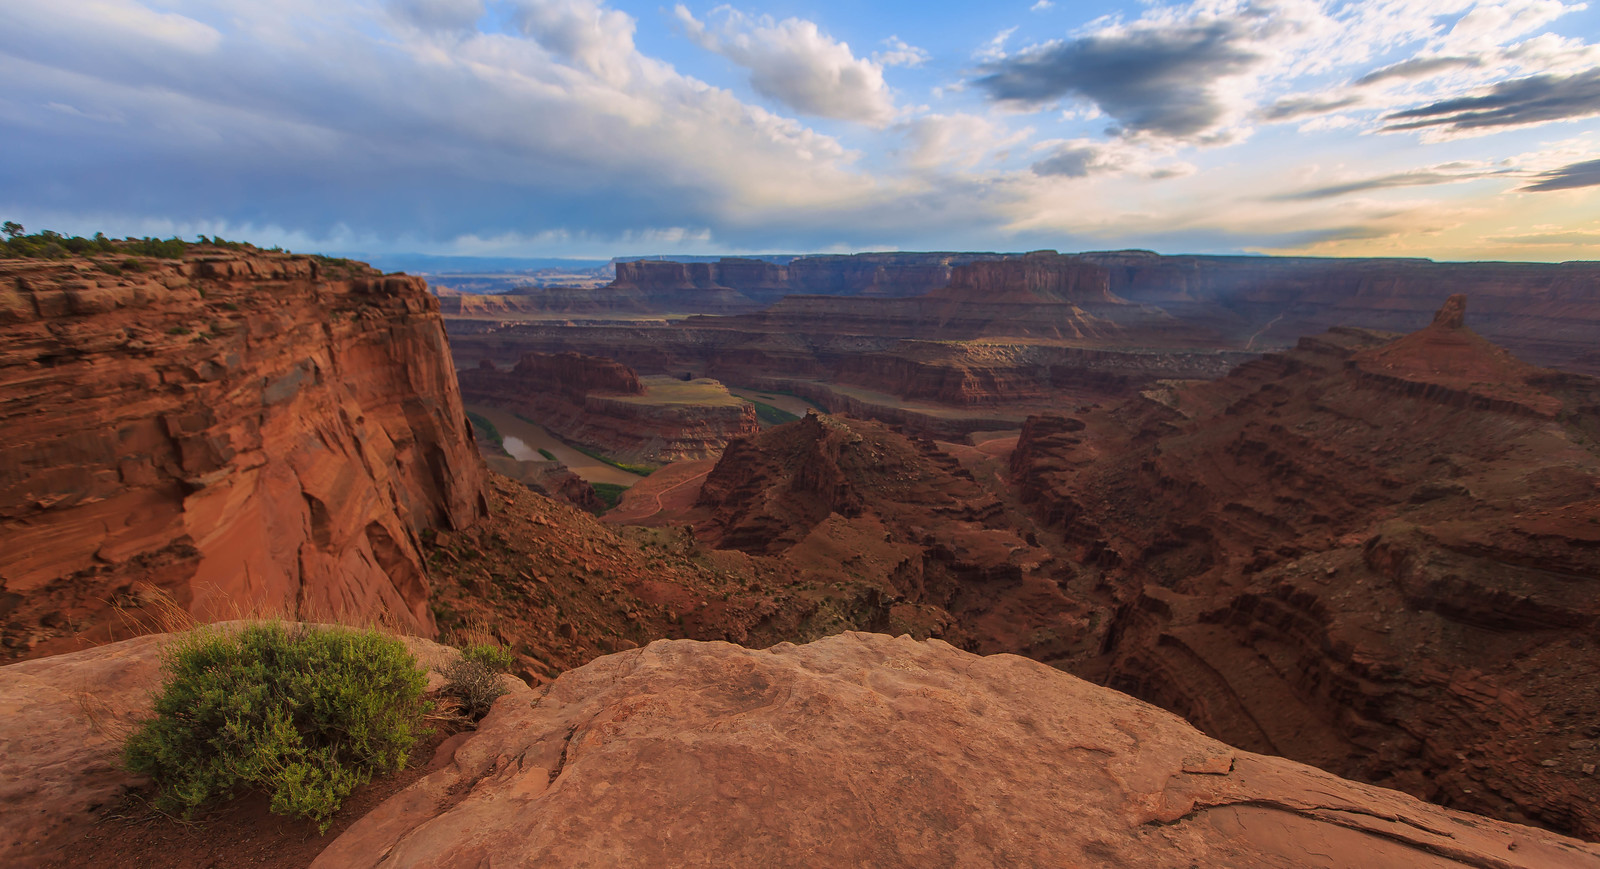 A view from atop a red clay colored canyon top.